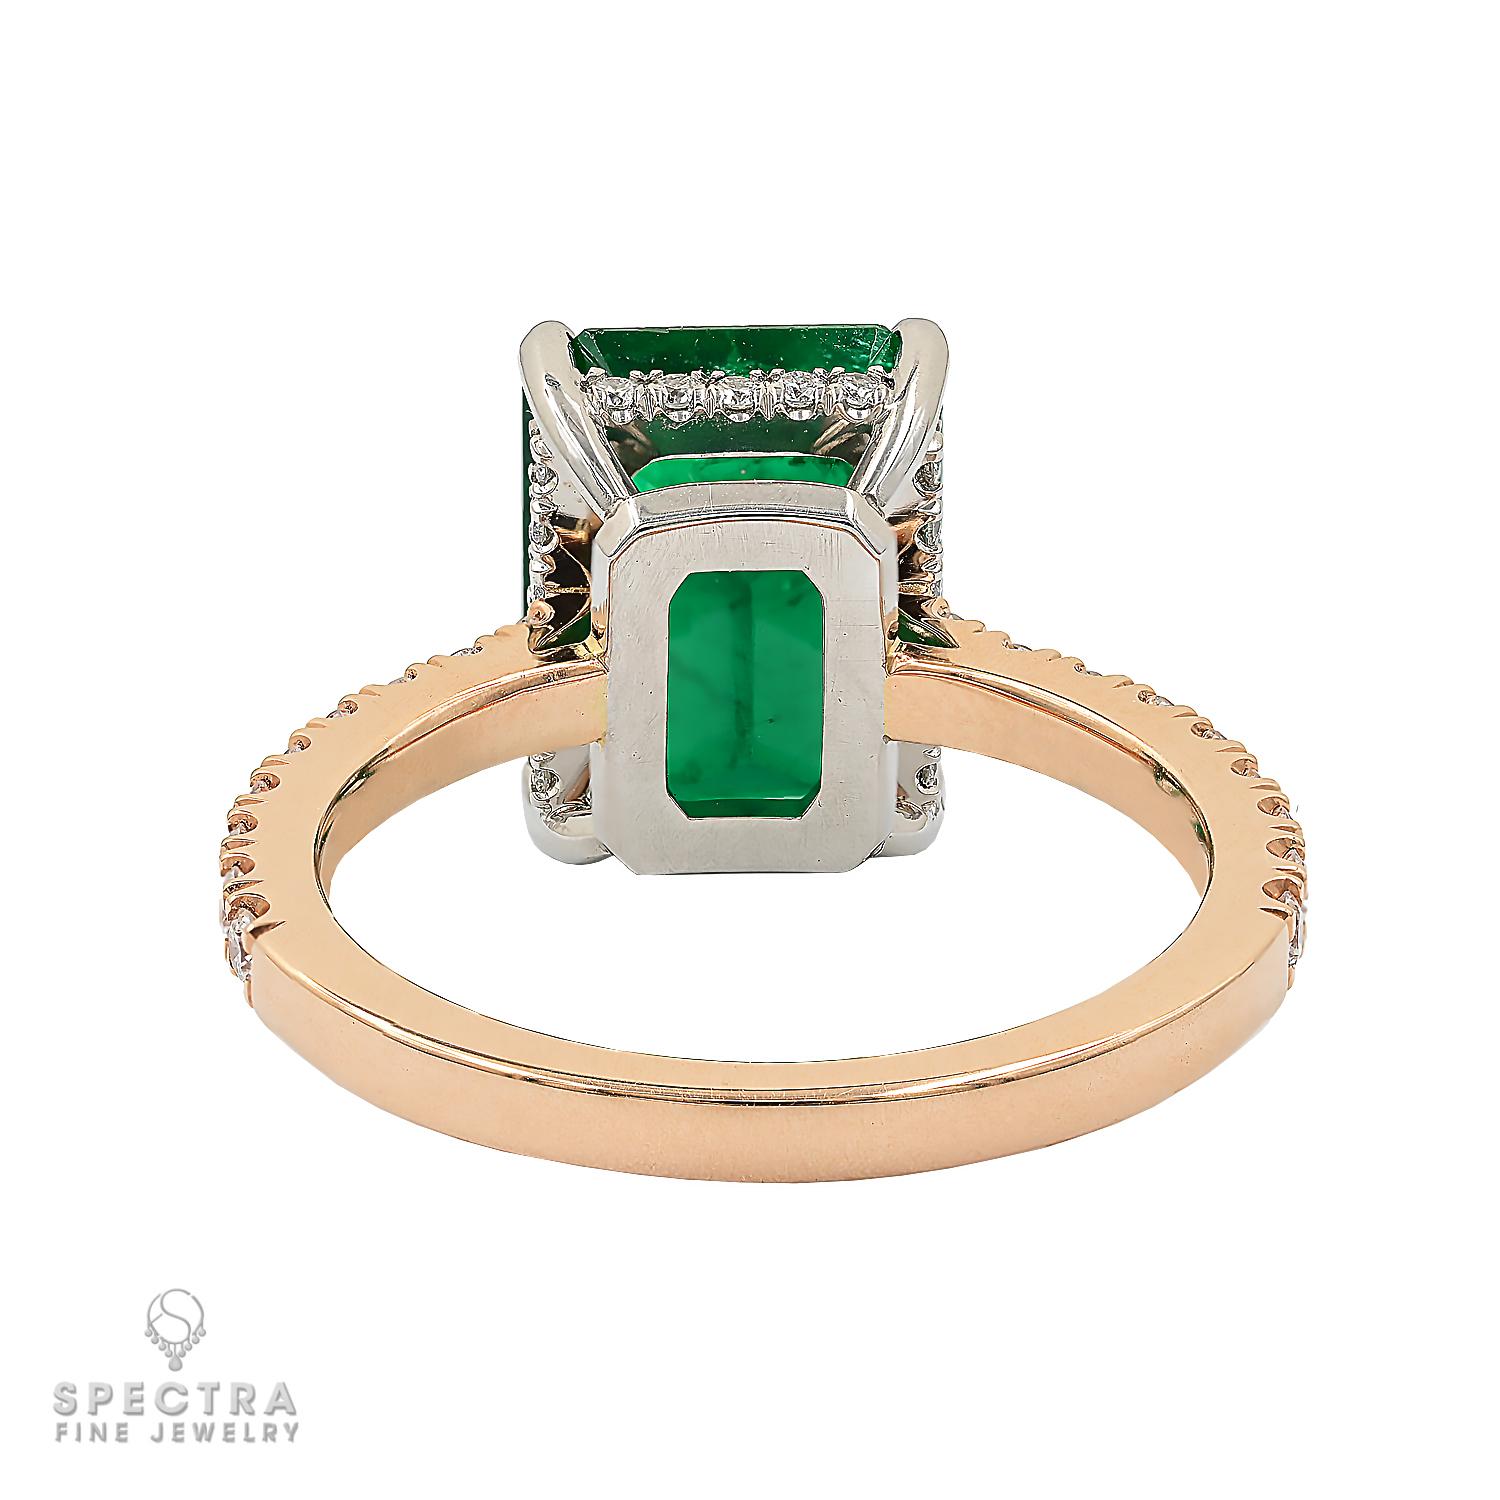 Contemporary Spectra Fine Jewelry GRS Certified 3.22 Carat Himalayan Emerald Diamond Ring For Sale